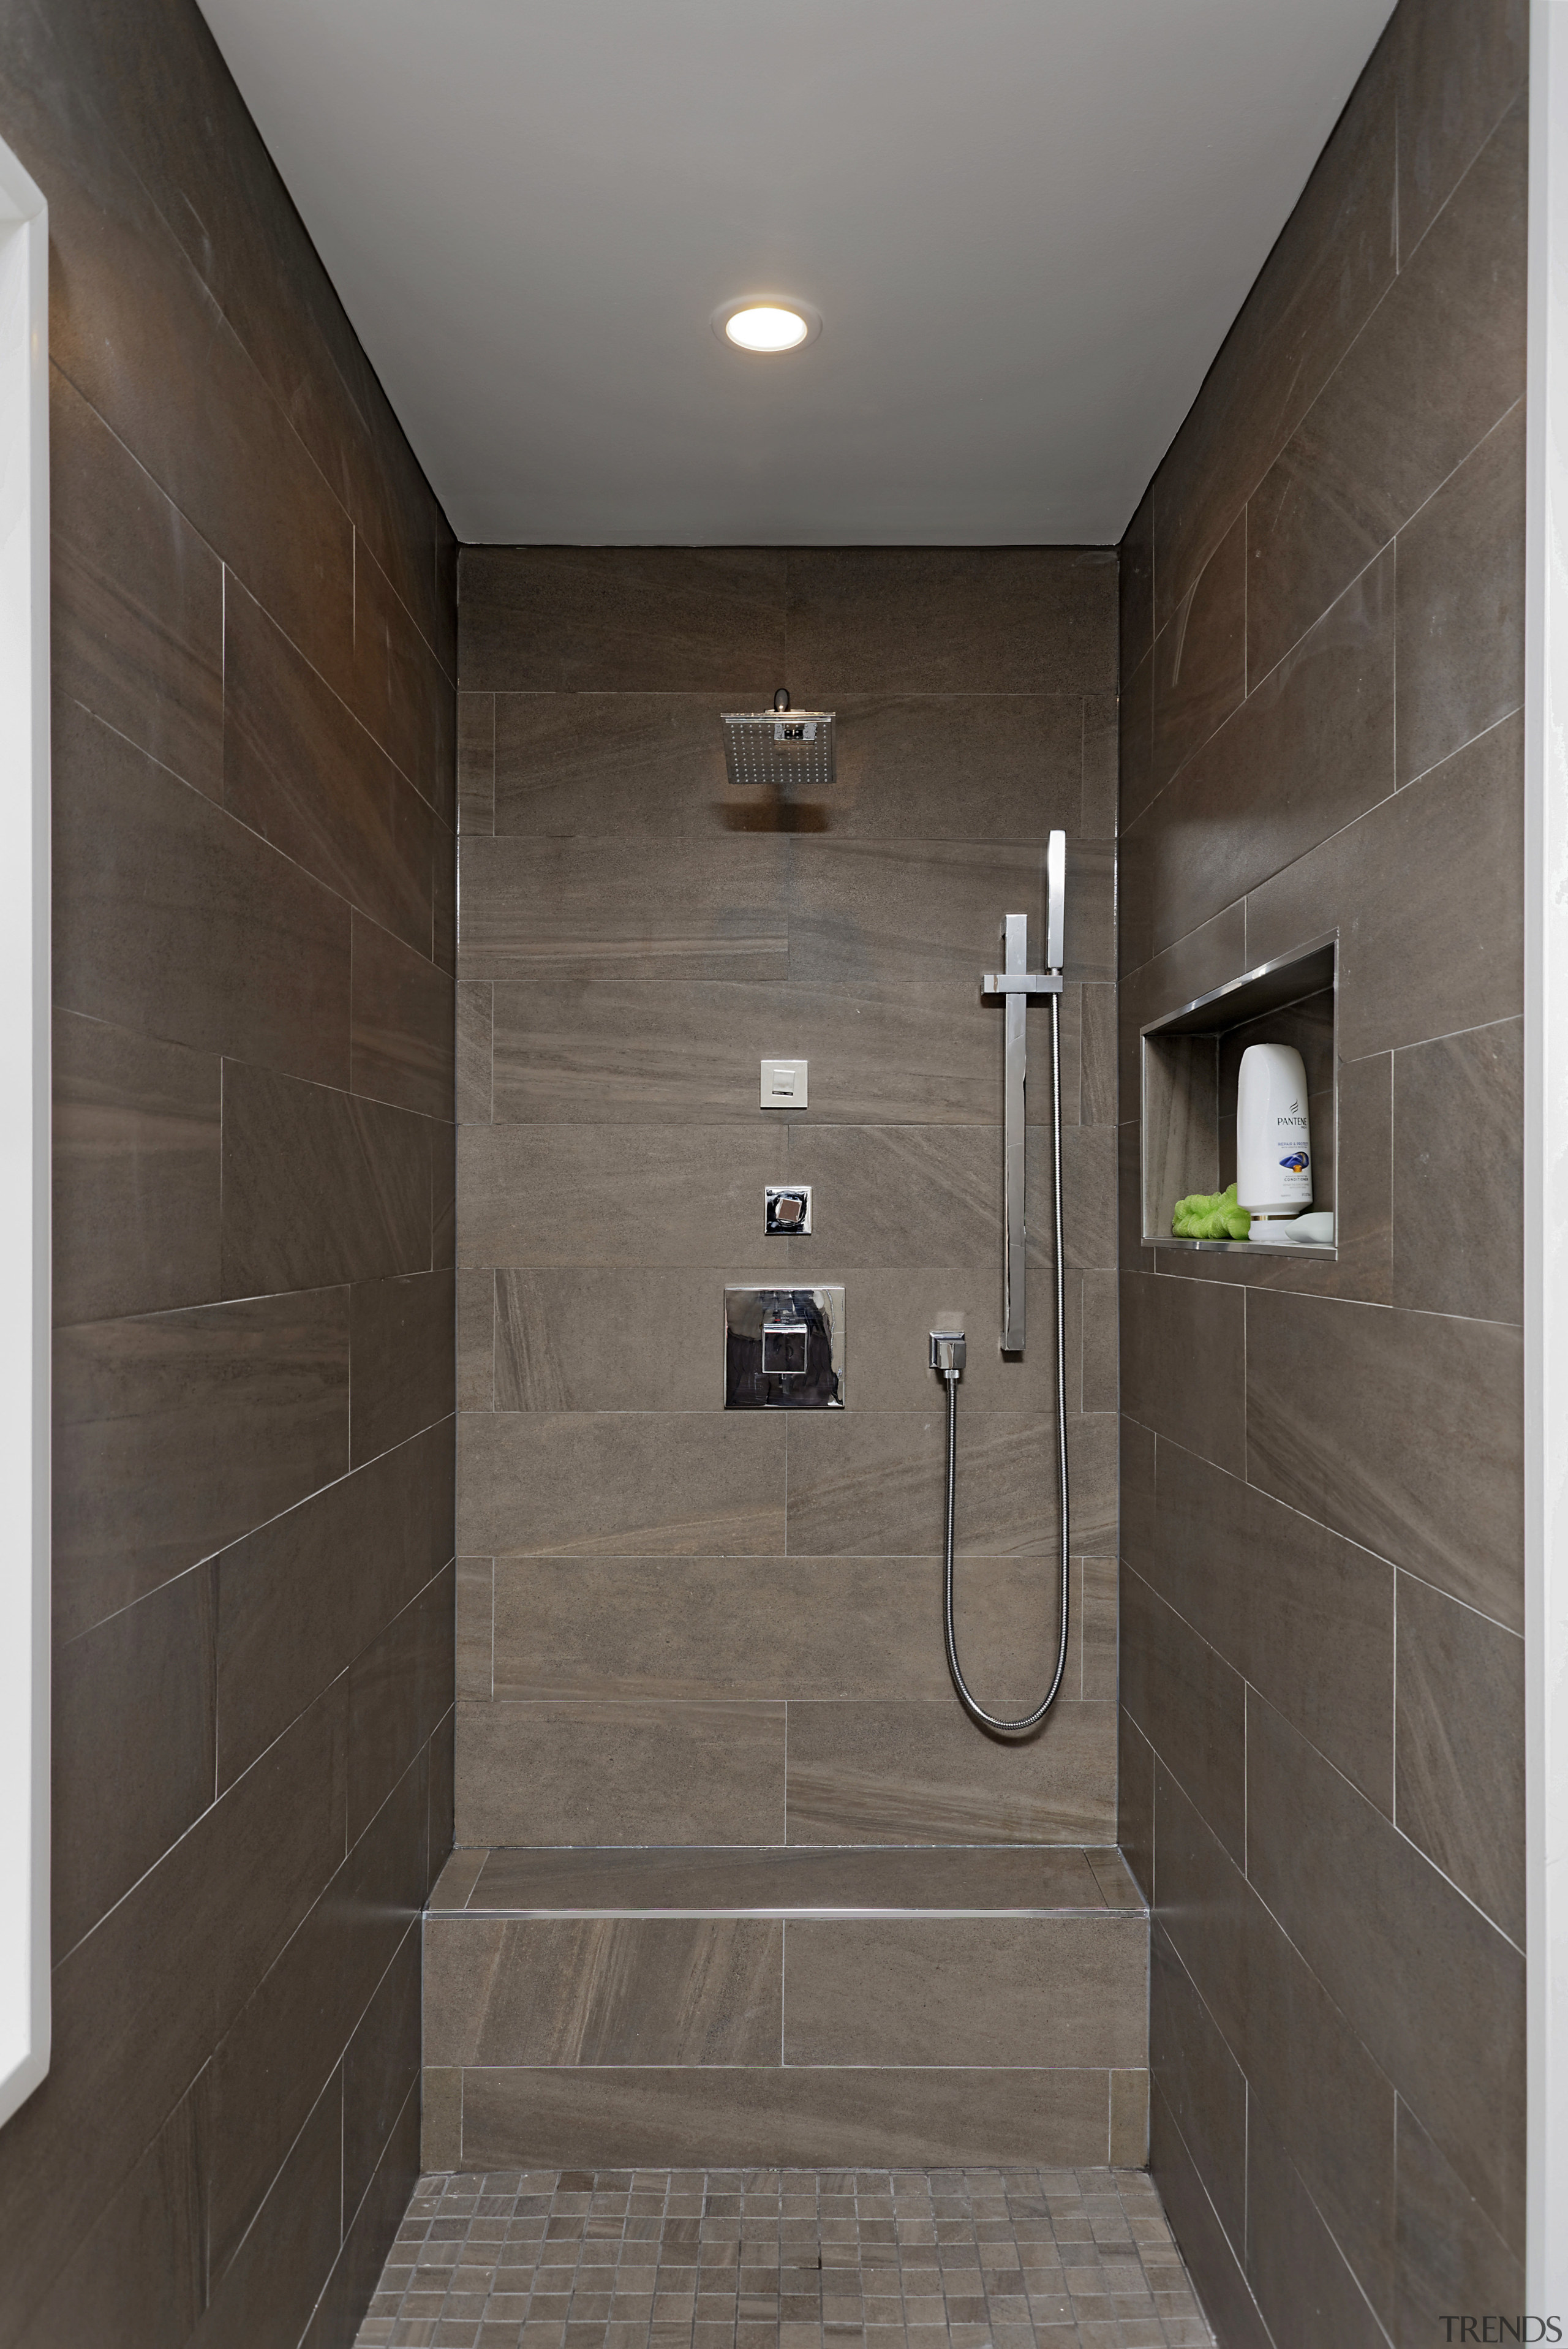 The two his and hers shower niches are bathroom, daylighting, floor, flooring, interior design, plumbing fixture, room, shower, tile, wall, gray, black